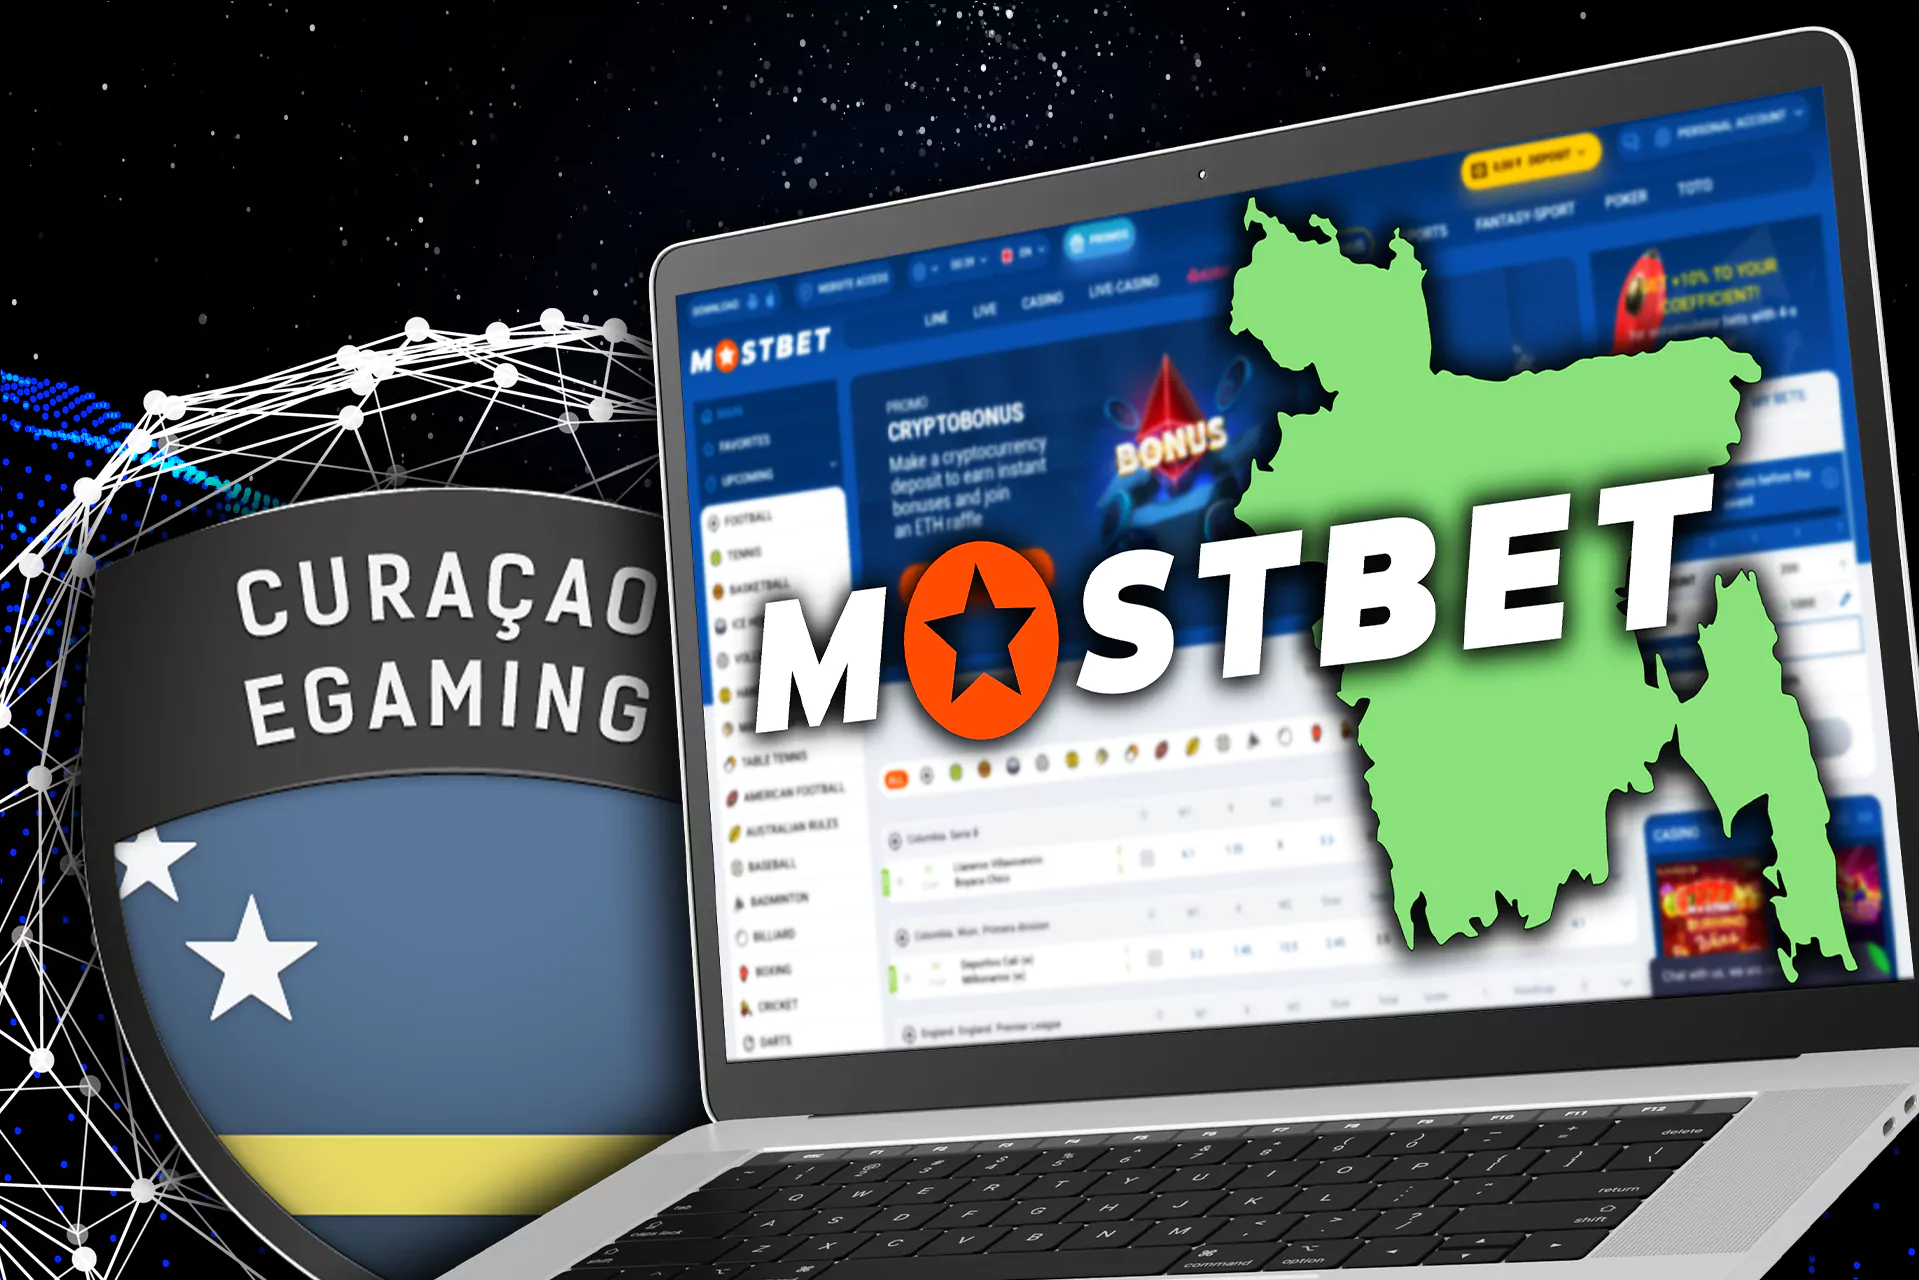 The official website Mostbet, the license under which it operates and the geography of the current site.